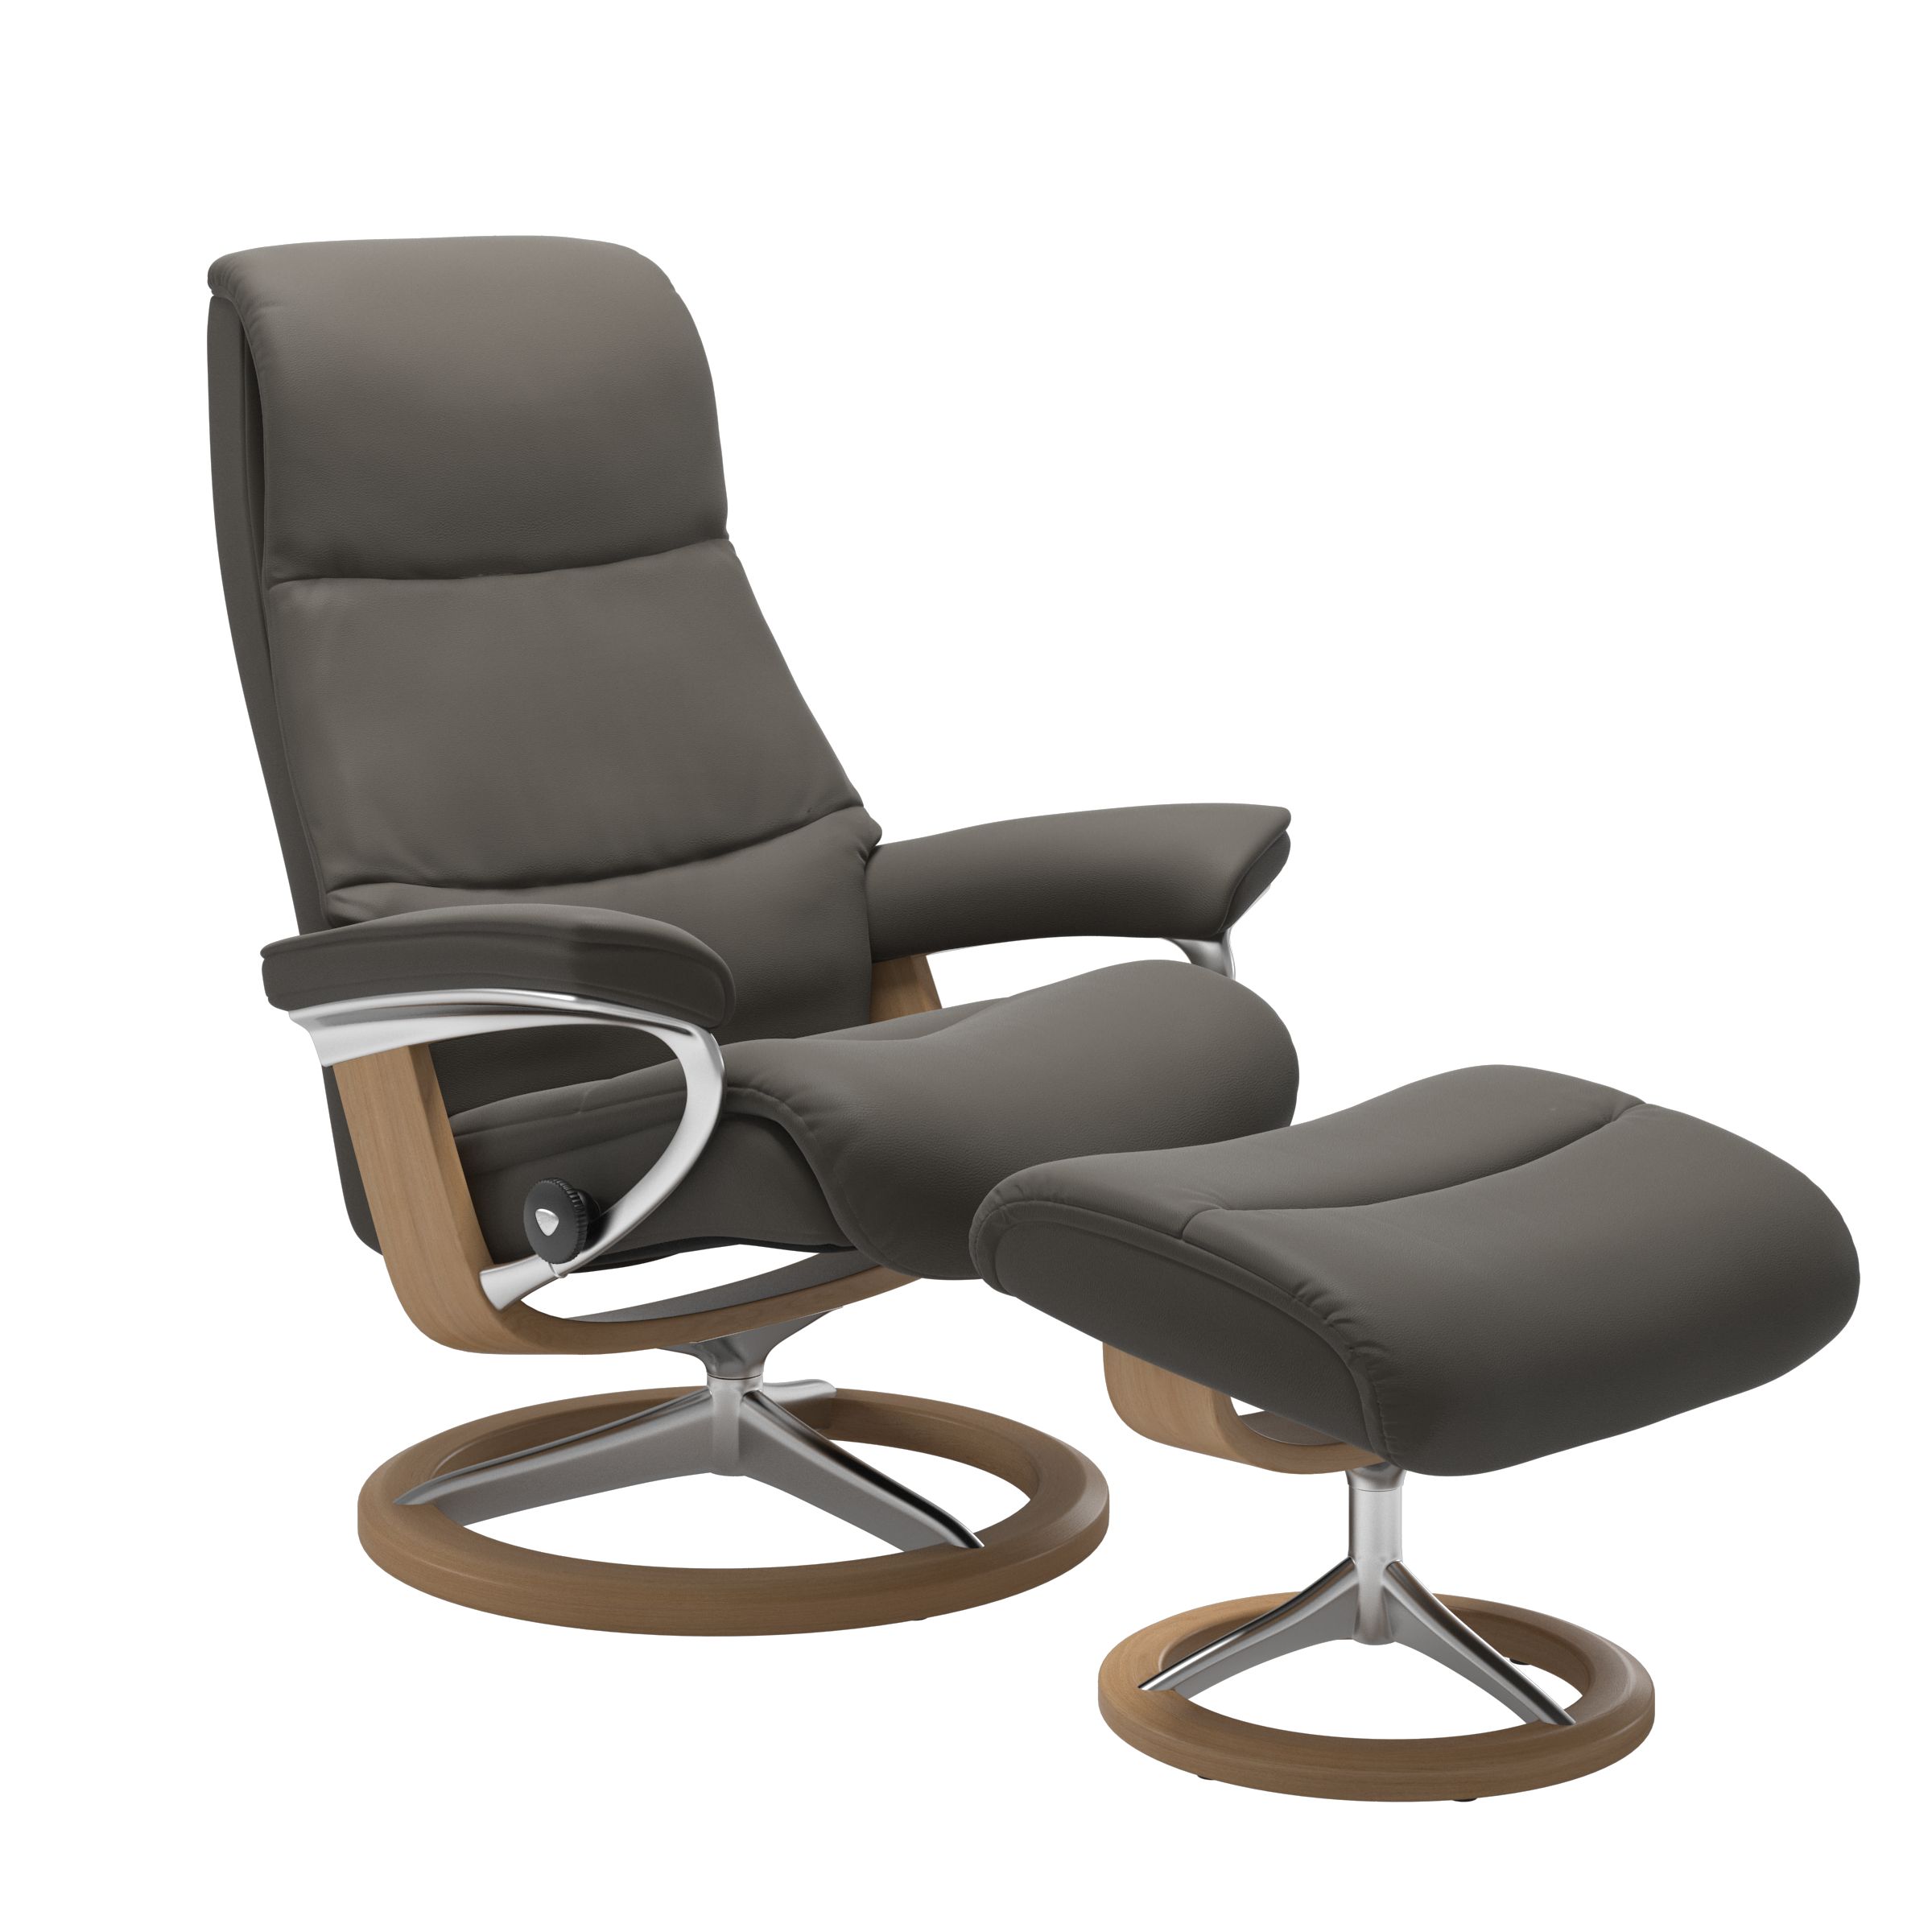 Stressless View Medium Recliner and Ottoman with Signature Base